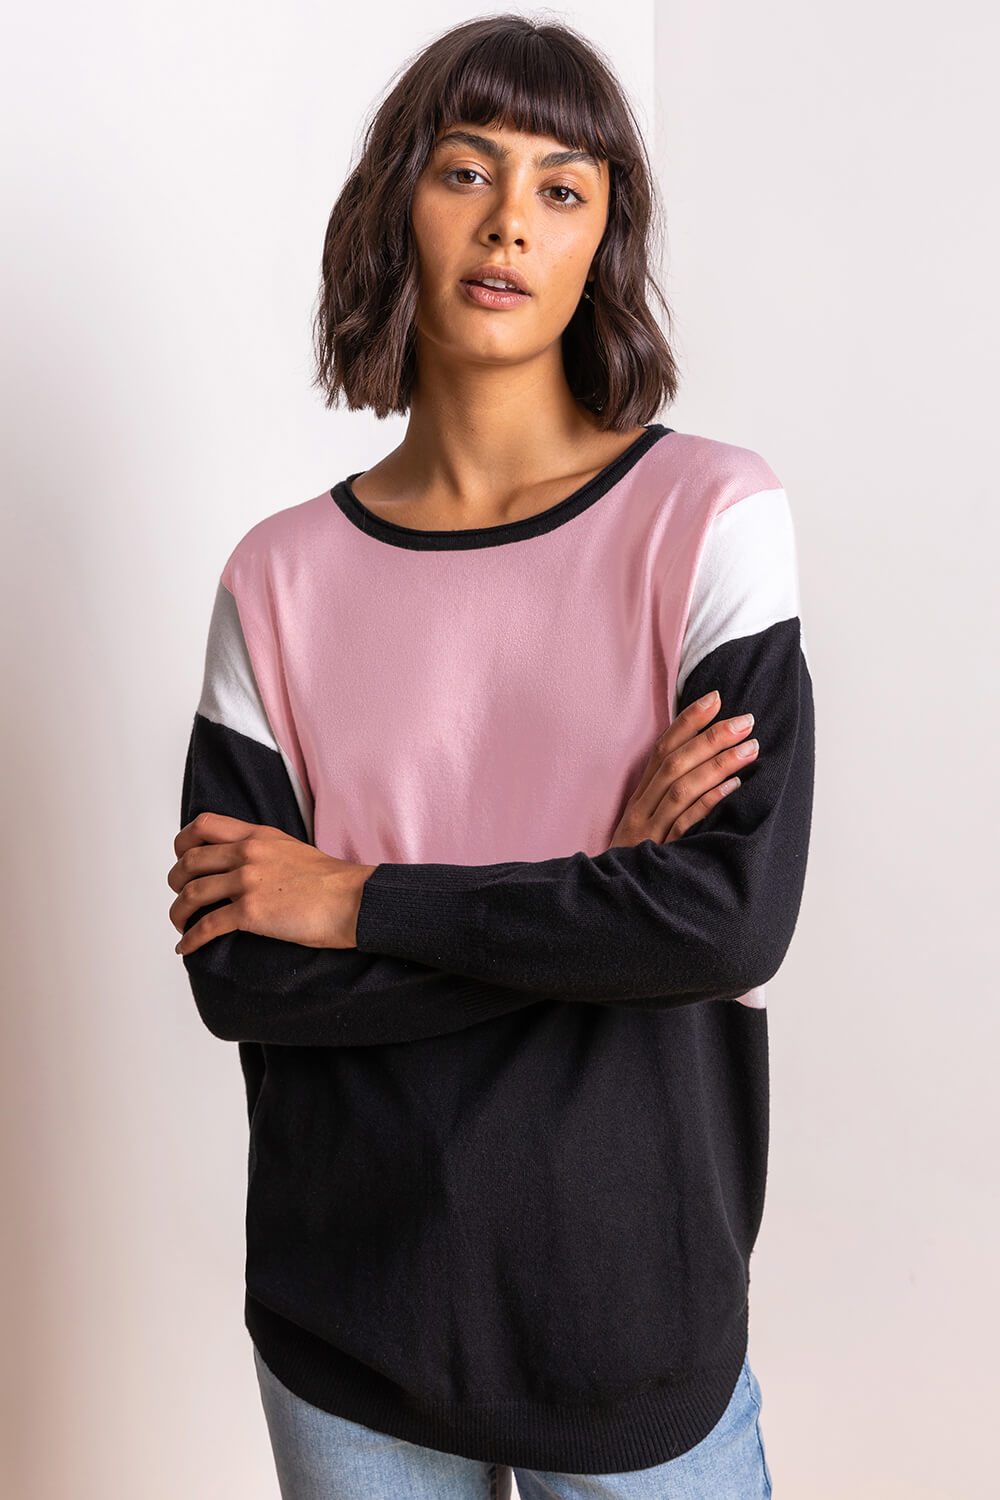 PINK Colour Block Round Neck Jumper, Image 4 of 5